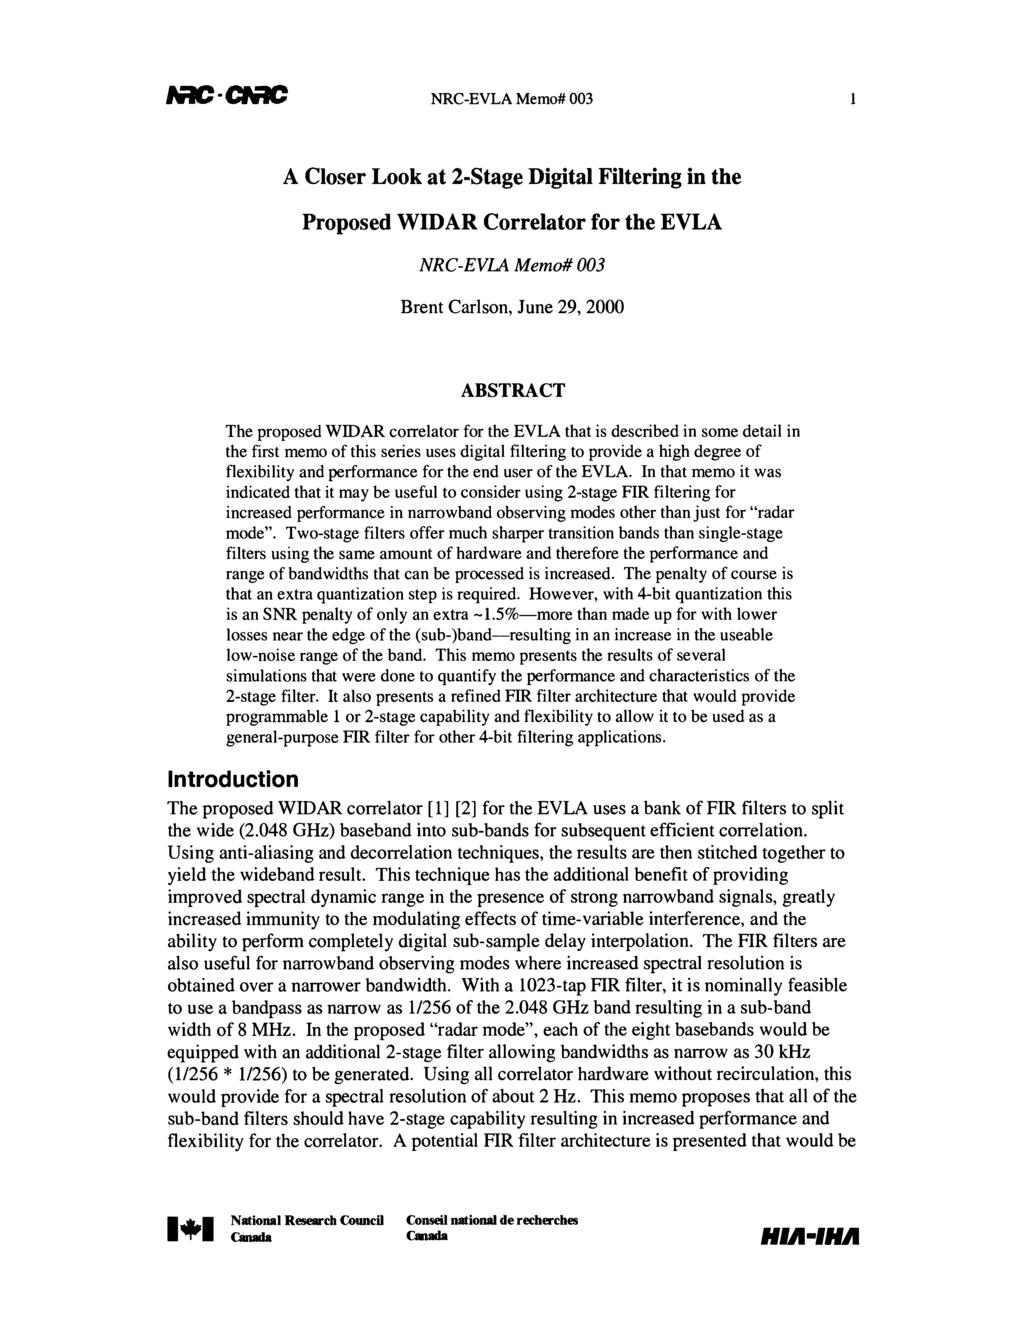 MC GMIC NRC-EVLA Memo# 003 1 A Closer Look at 2-Stage Digital Filtering in the Proposed WIDAR Correlator for the EVLA NRC-EVLA Memo# 003 Brent Carlson, June 29, 2000 ABSTRACT The proposed WIDAR